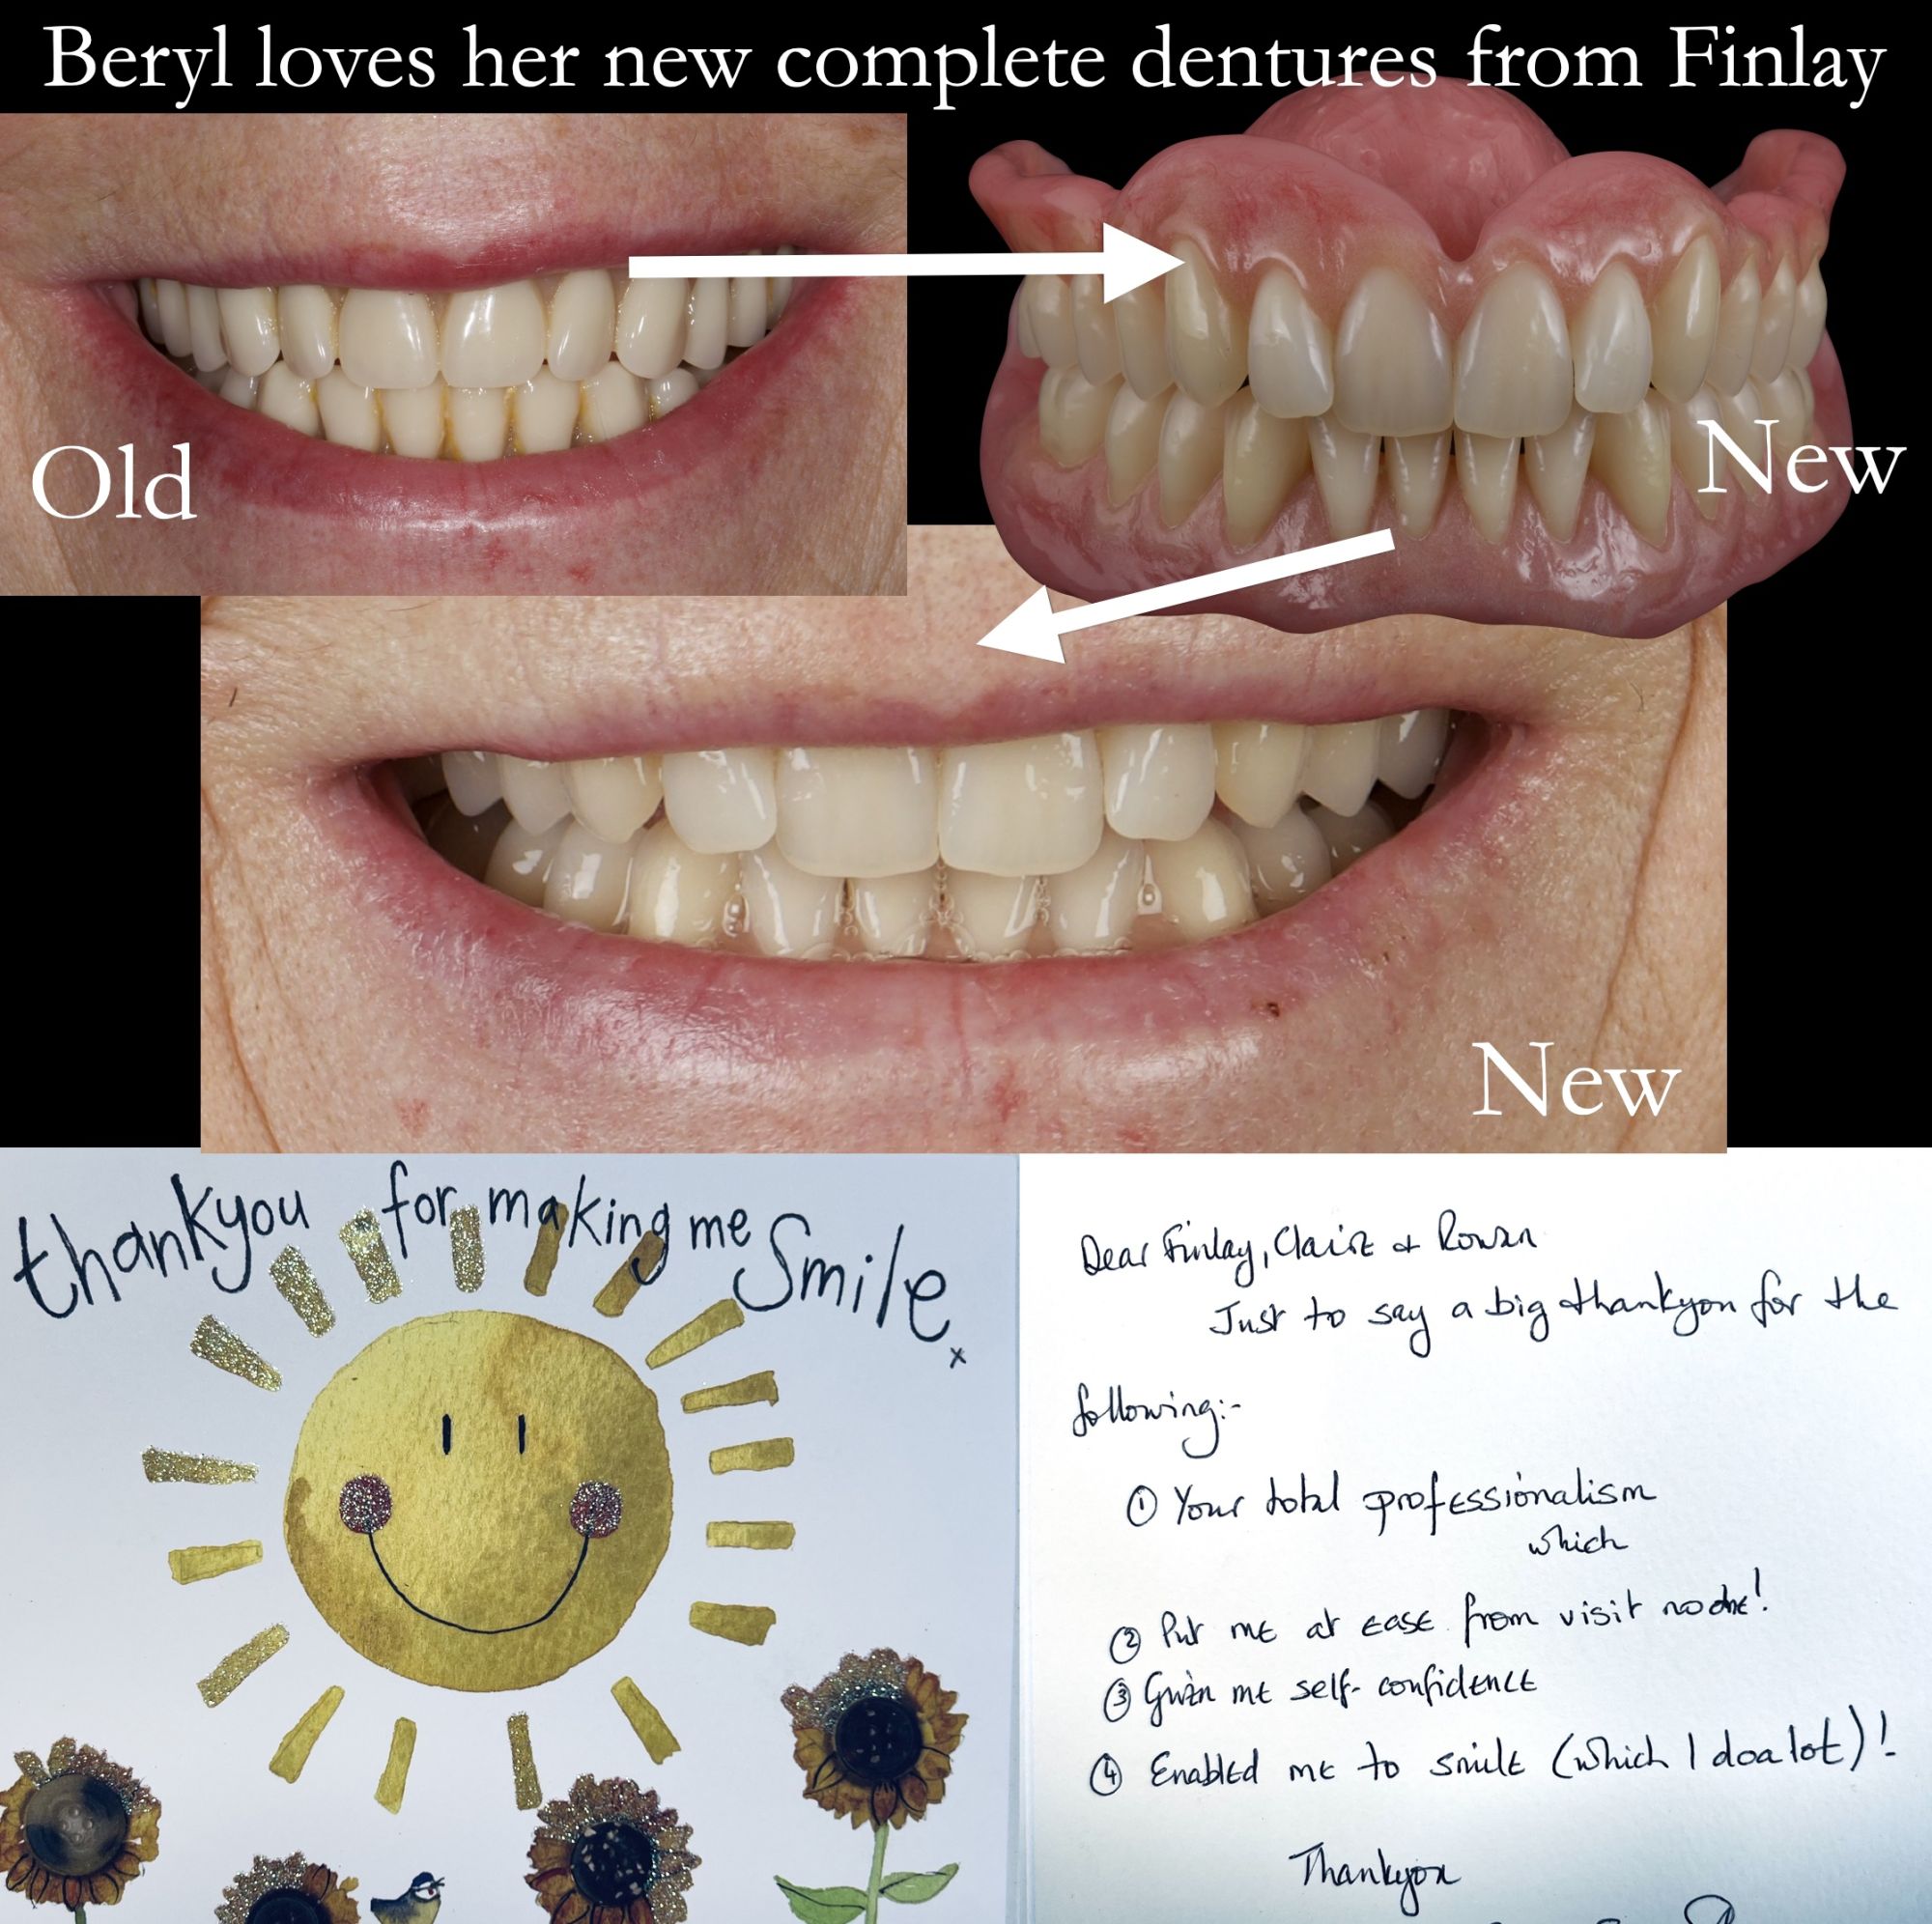 Beryl loves her new complete dentures from Finlay